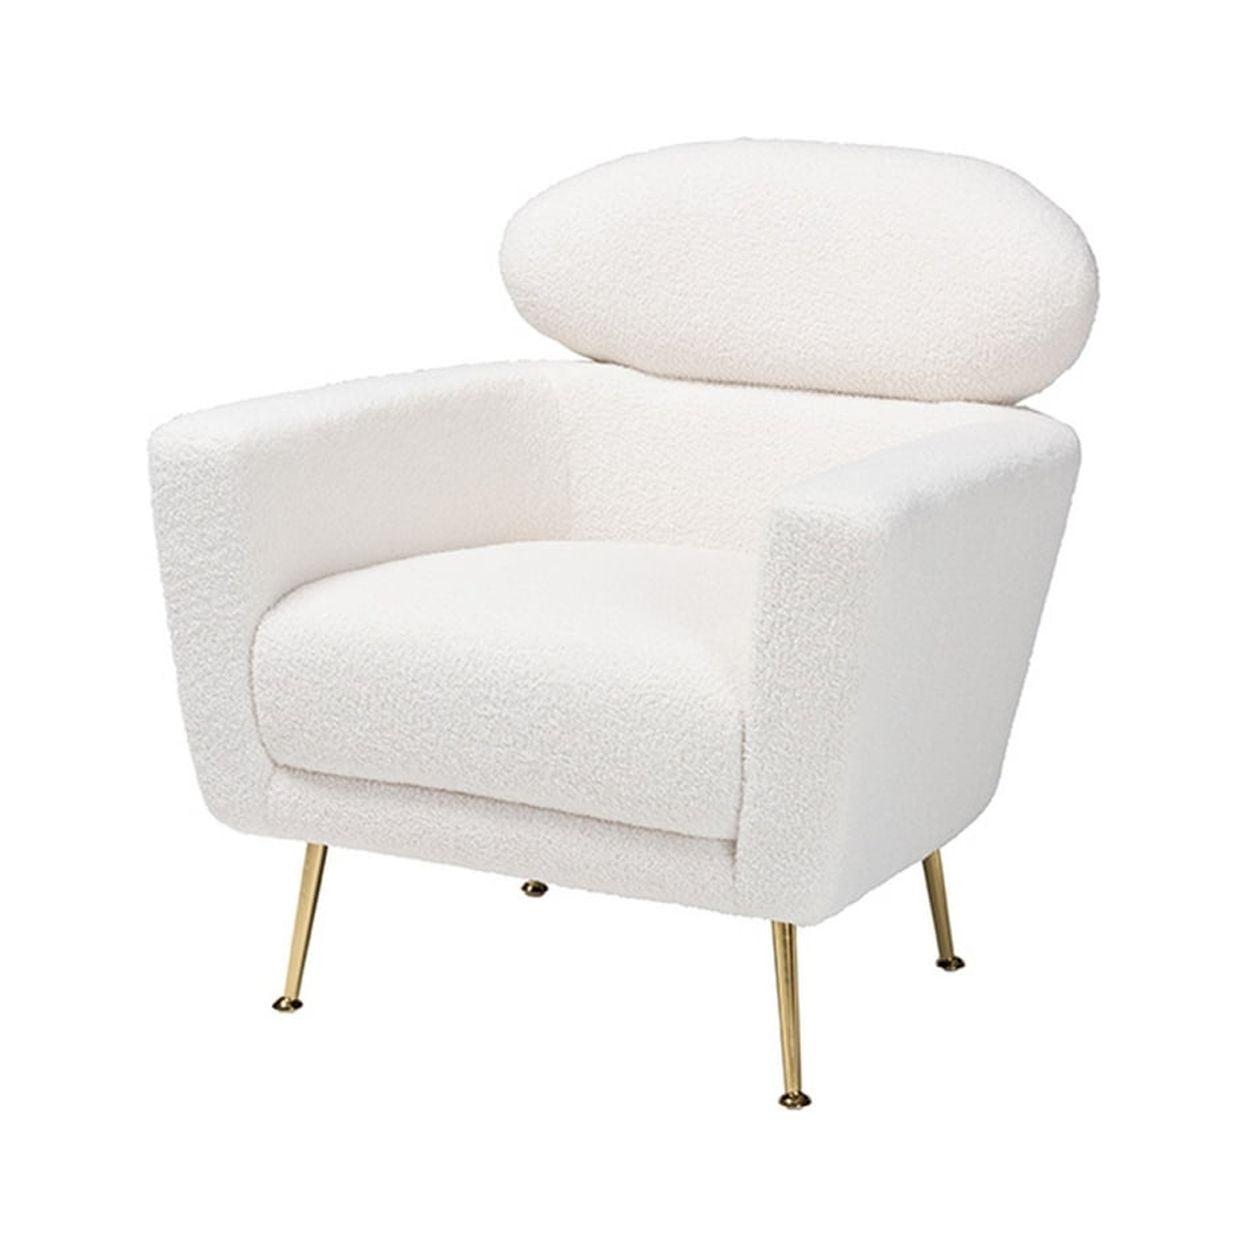 Beige Leather-Wood Contemporary Accent Chair with Angled Metal Legs